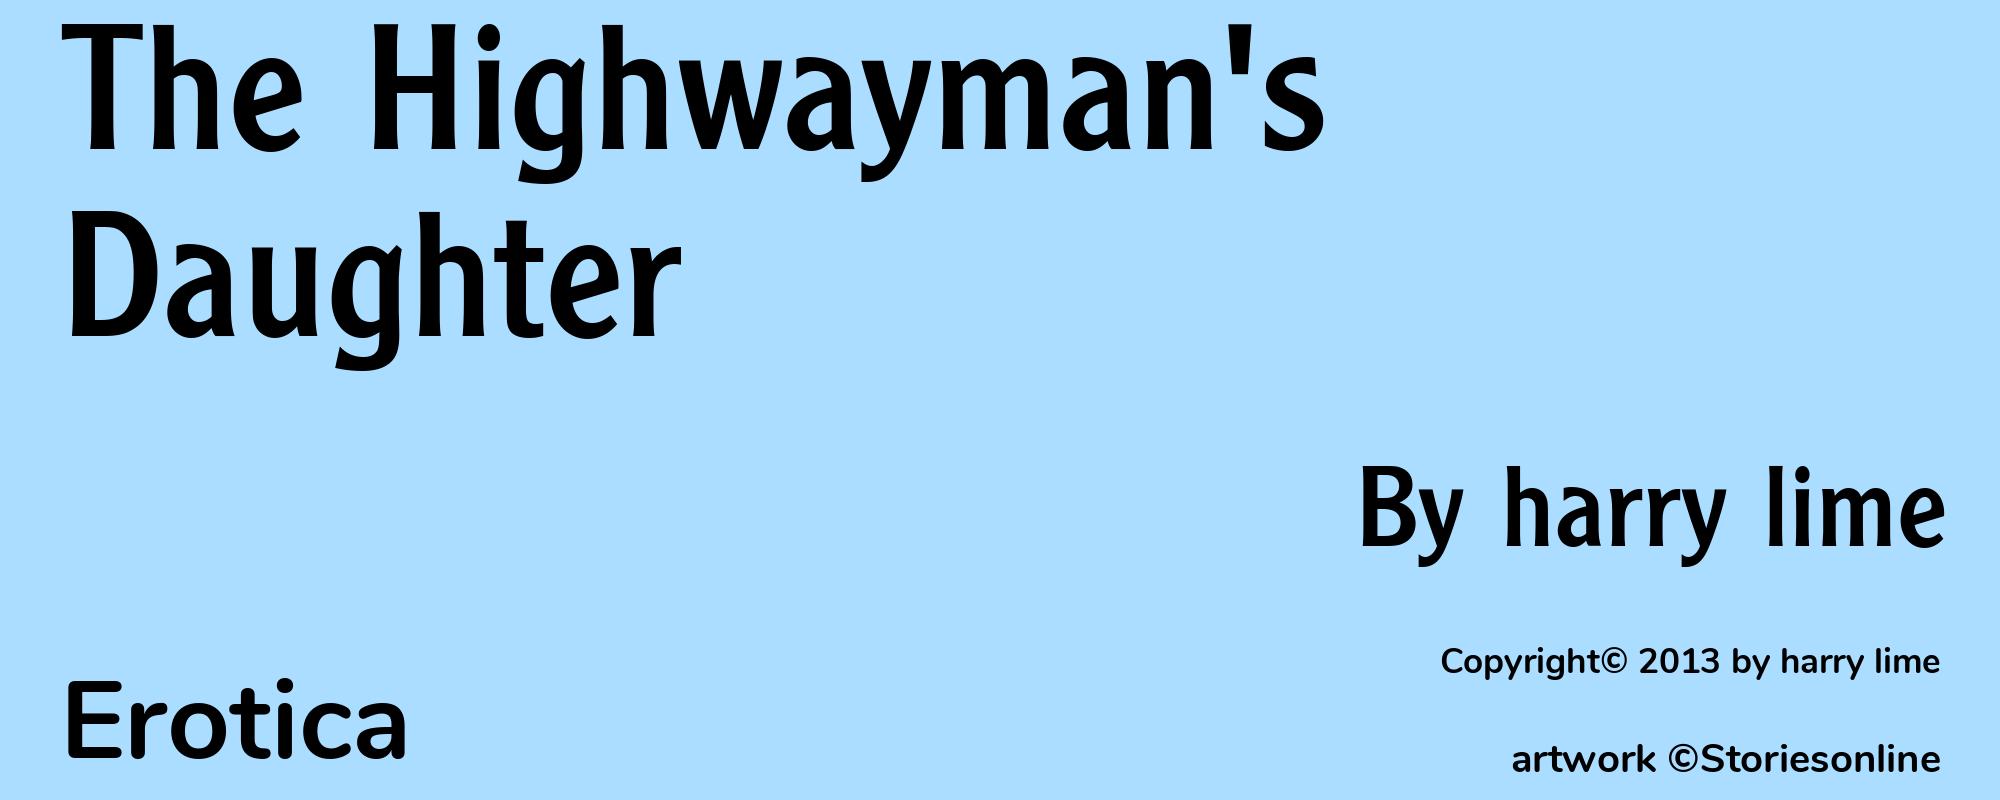 The Highwayman's Daughter - Cover